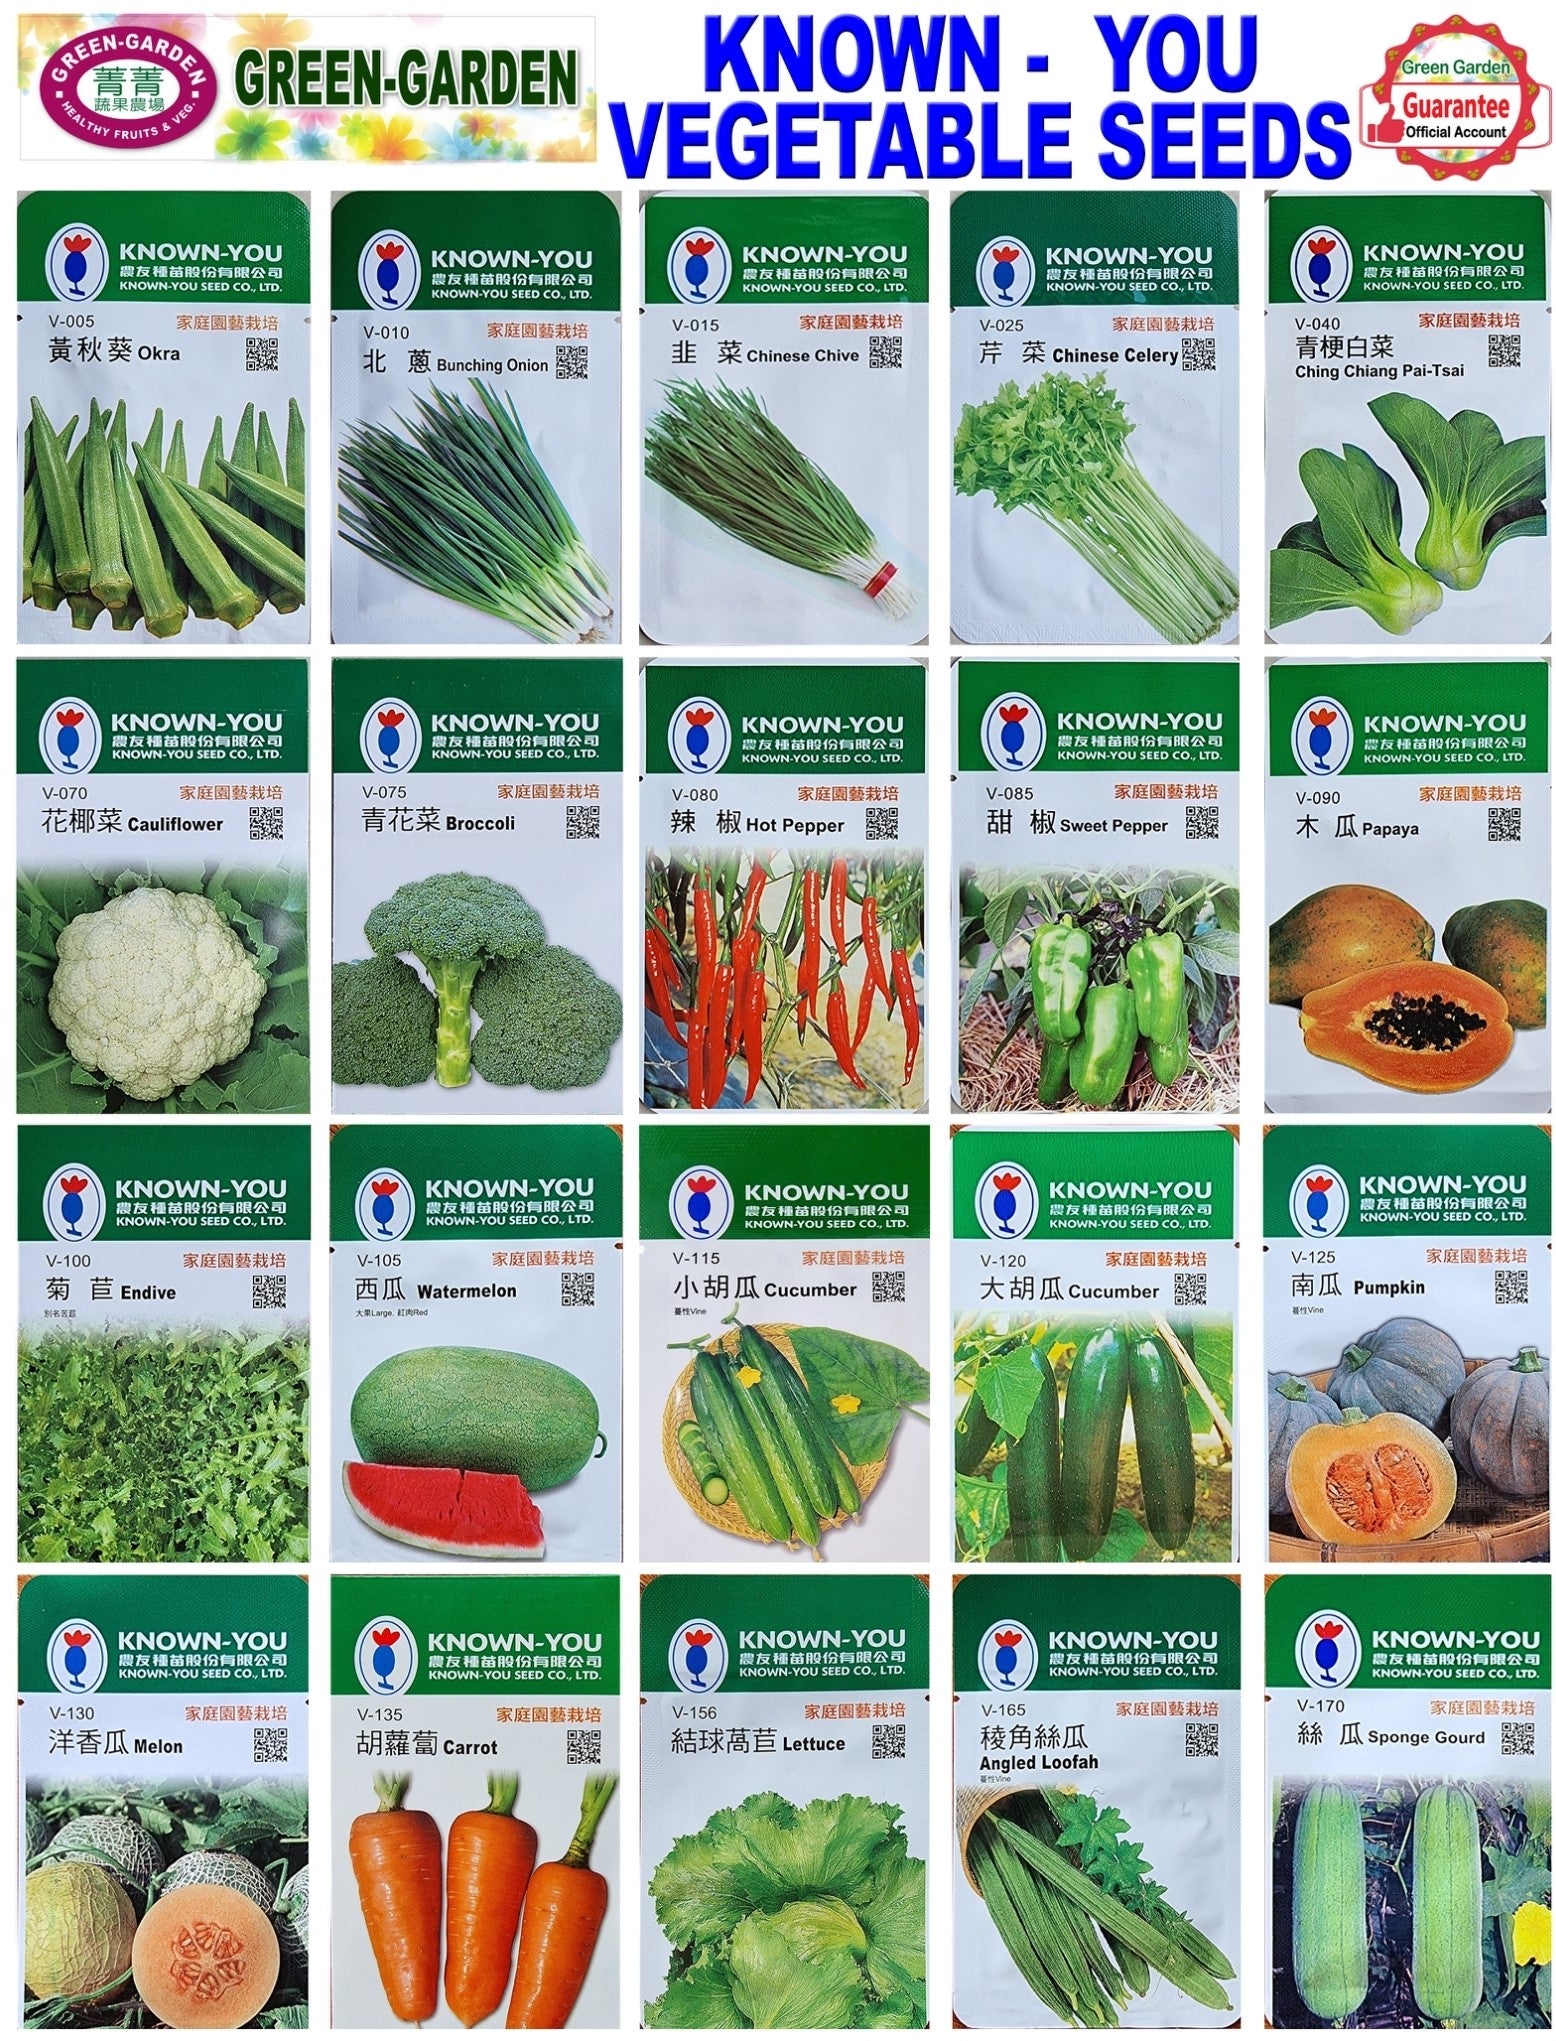 Known You Vegetable Seeds (V-115 Cucumber S)